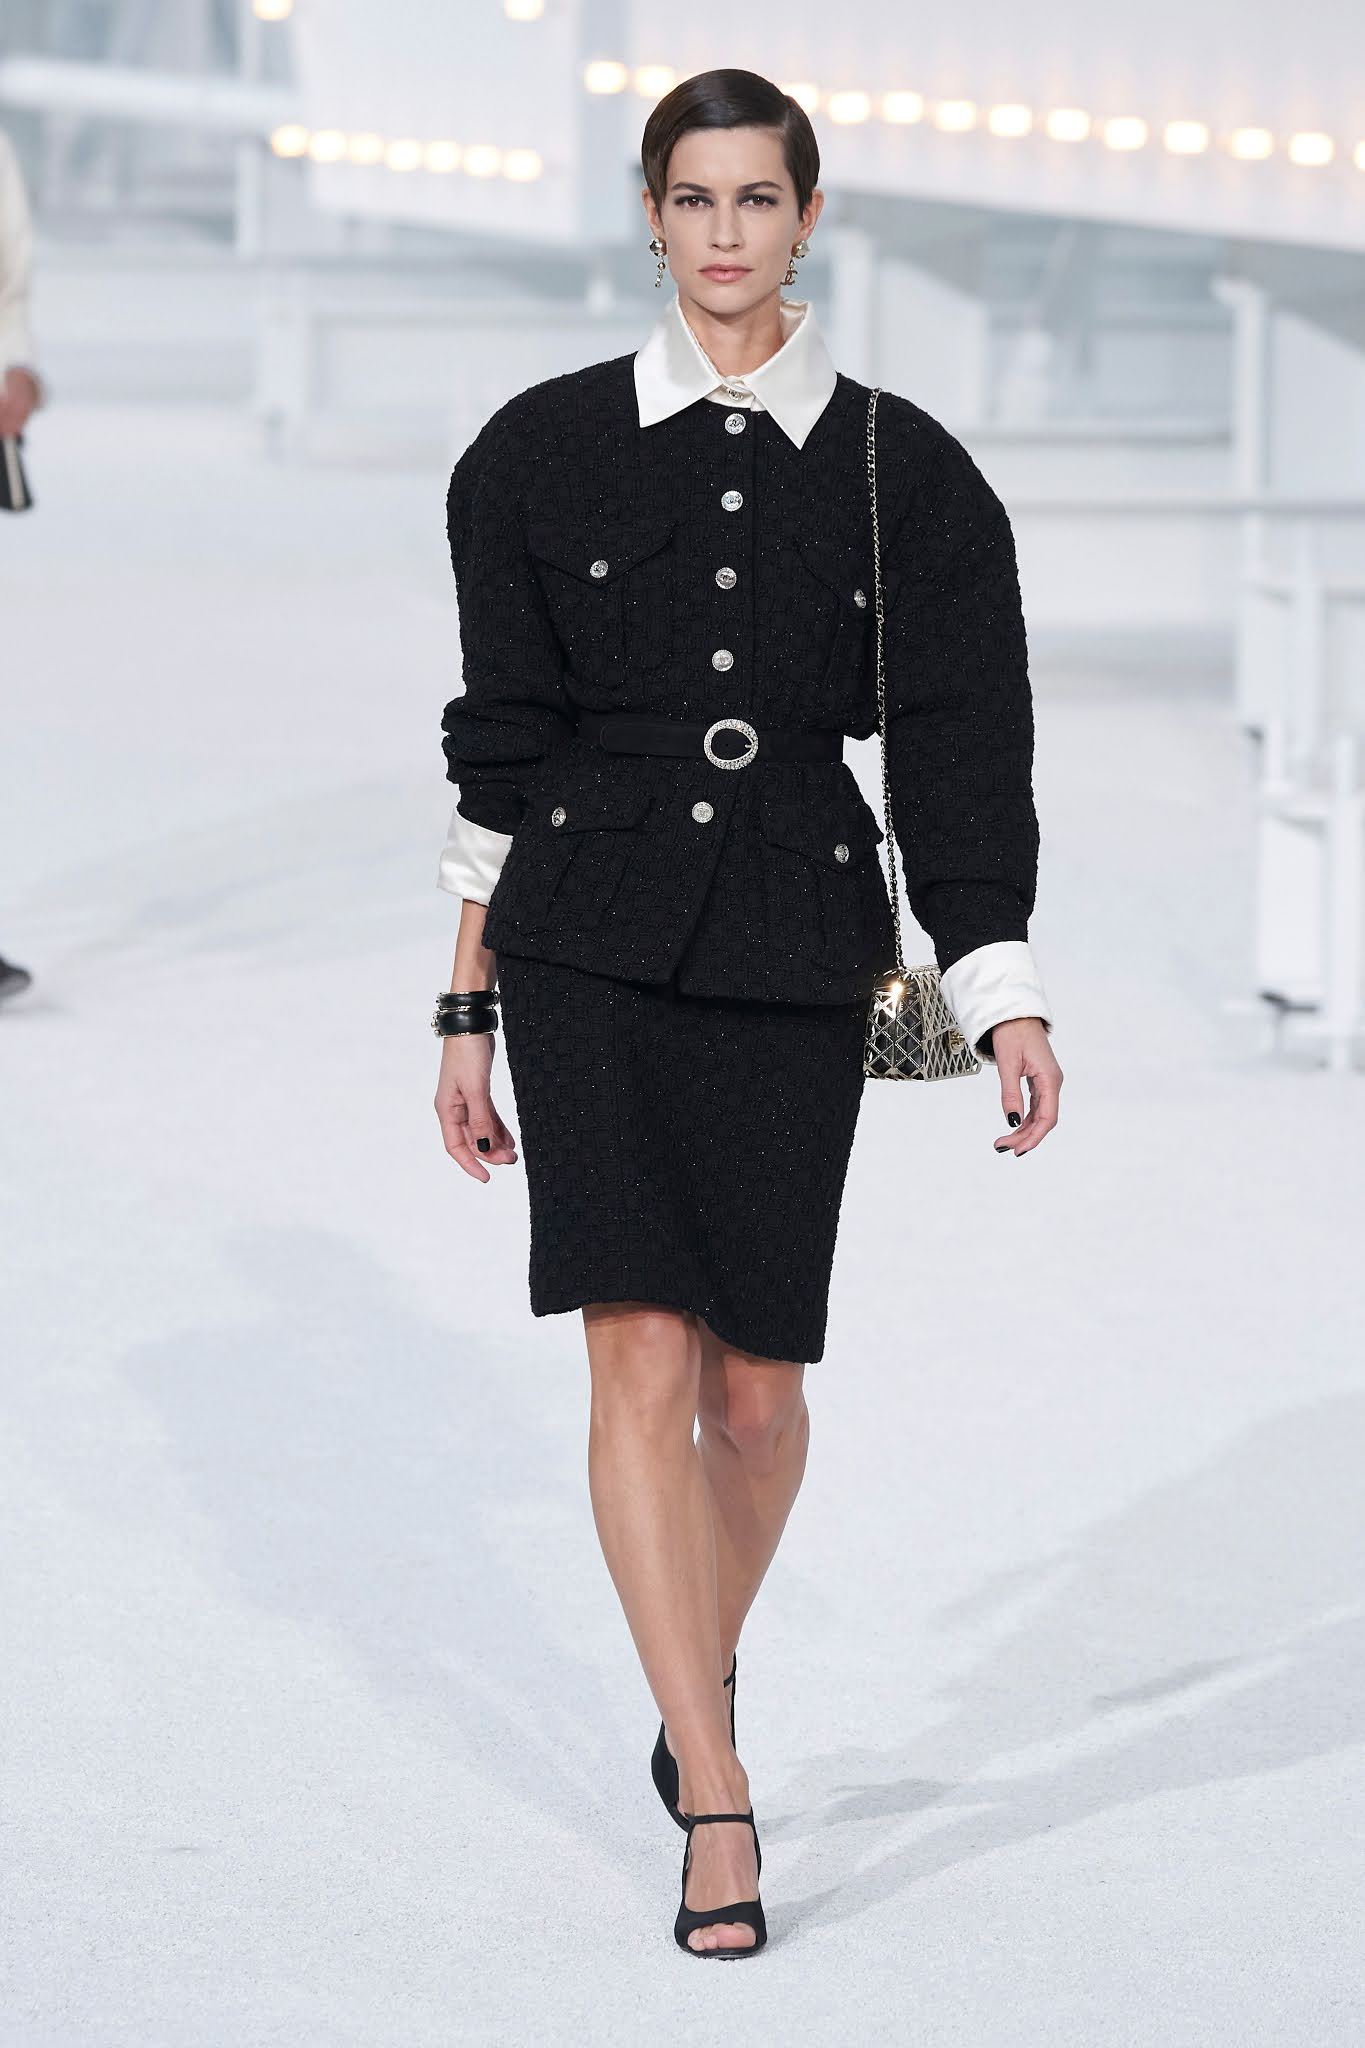 CHANEL: PURE GLAM